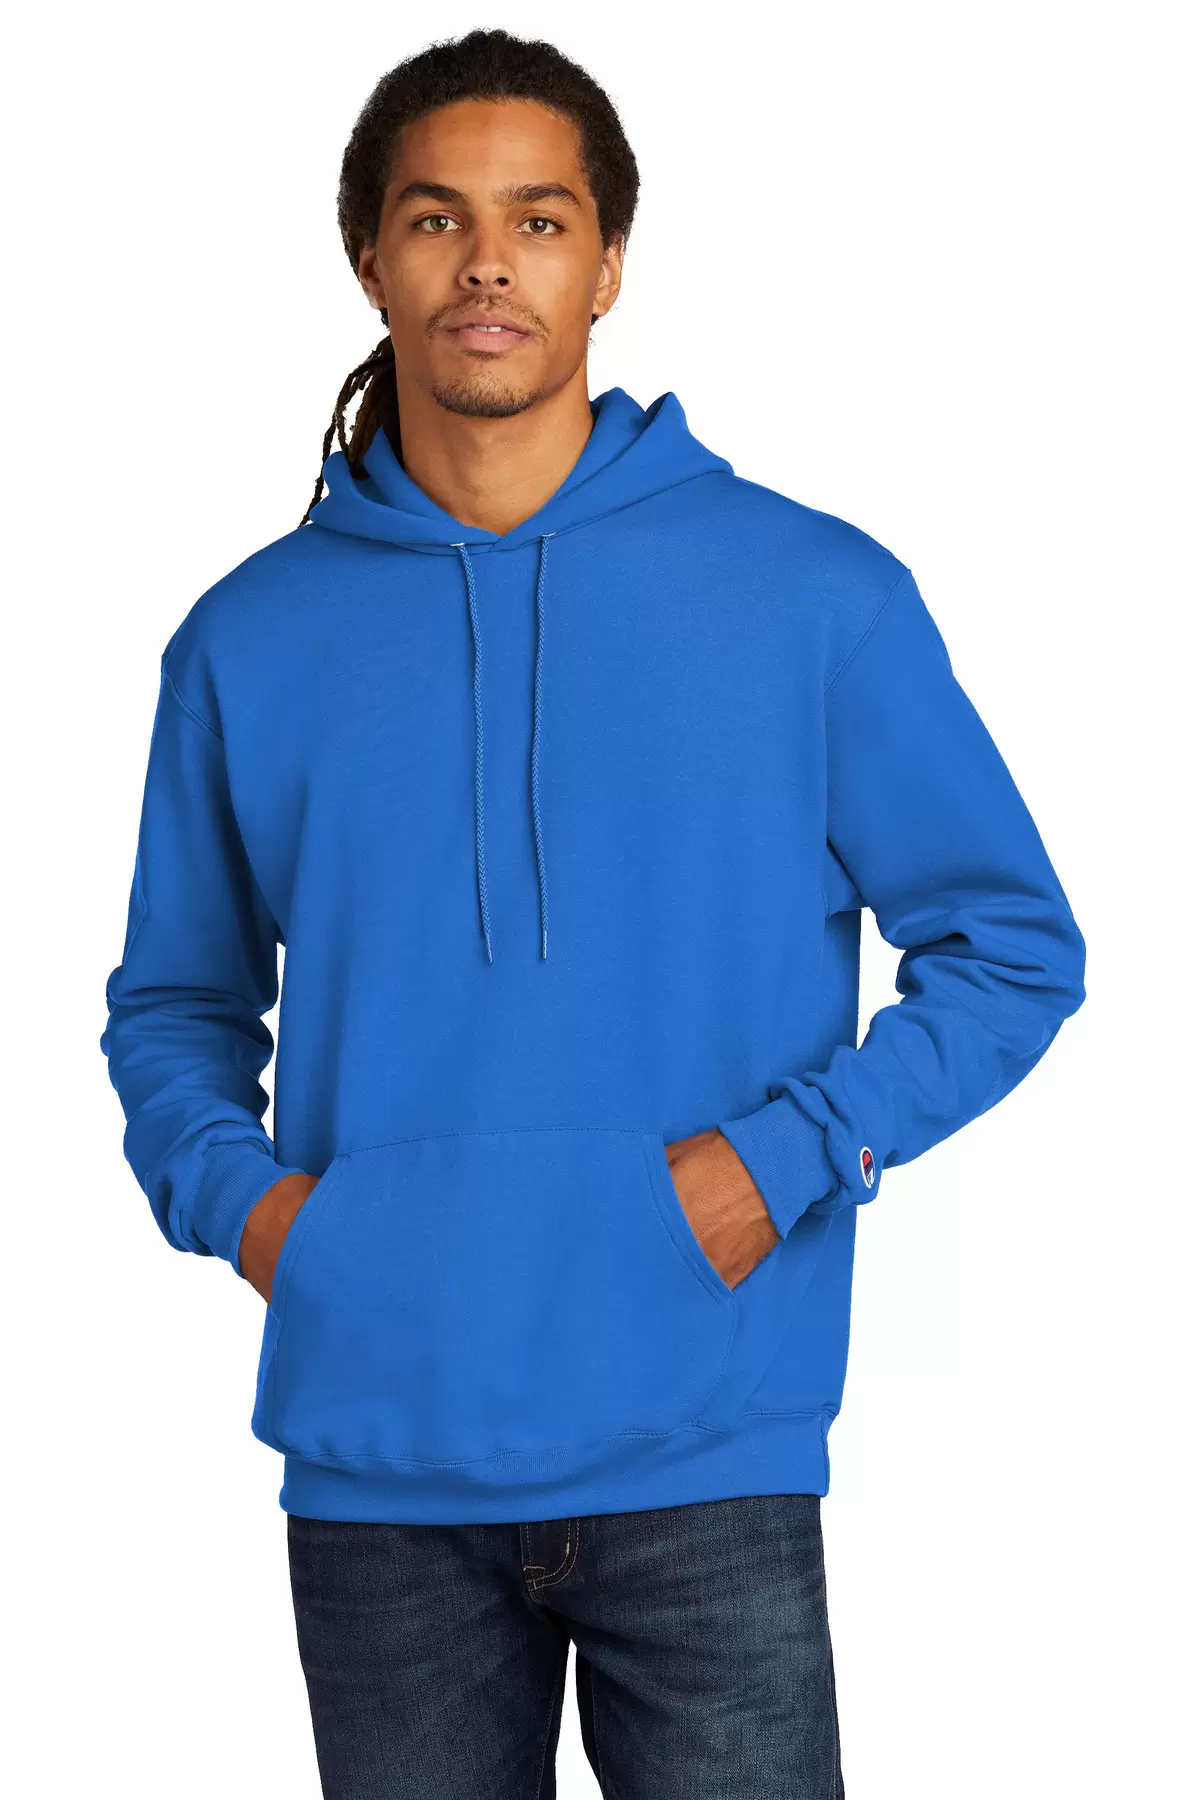 S700 Logo Hoodie - From $12.98